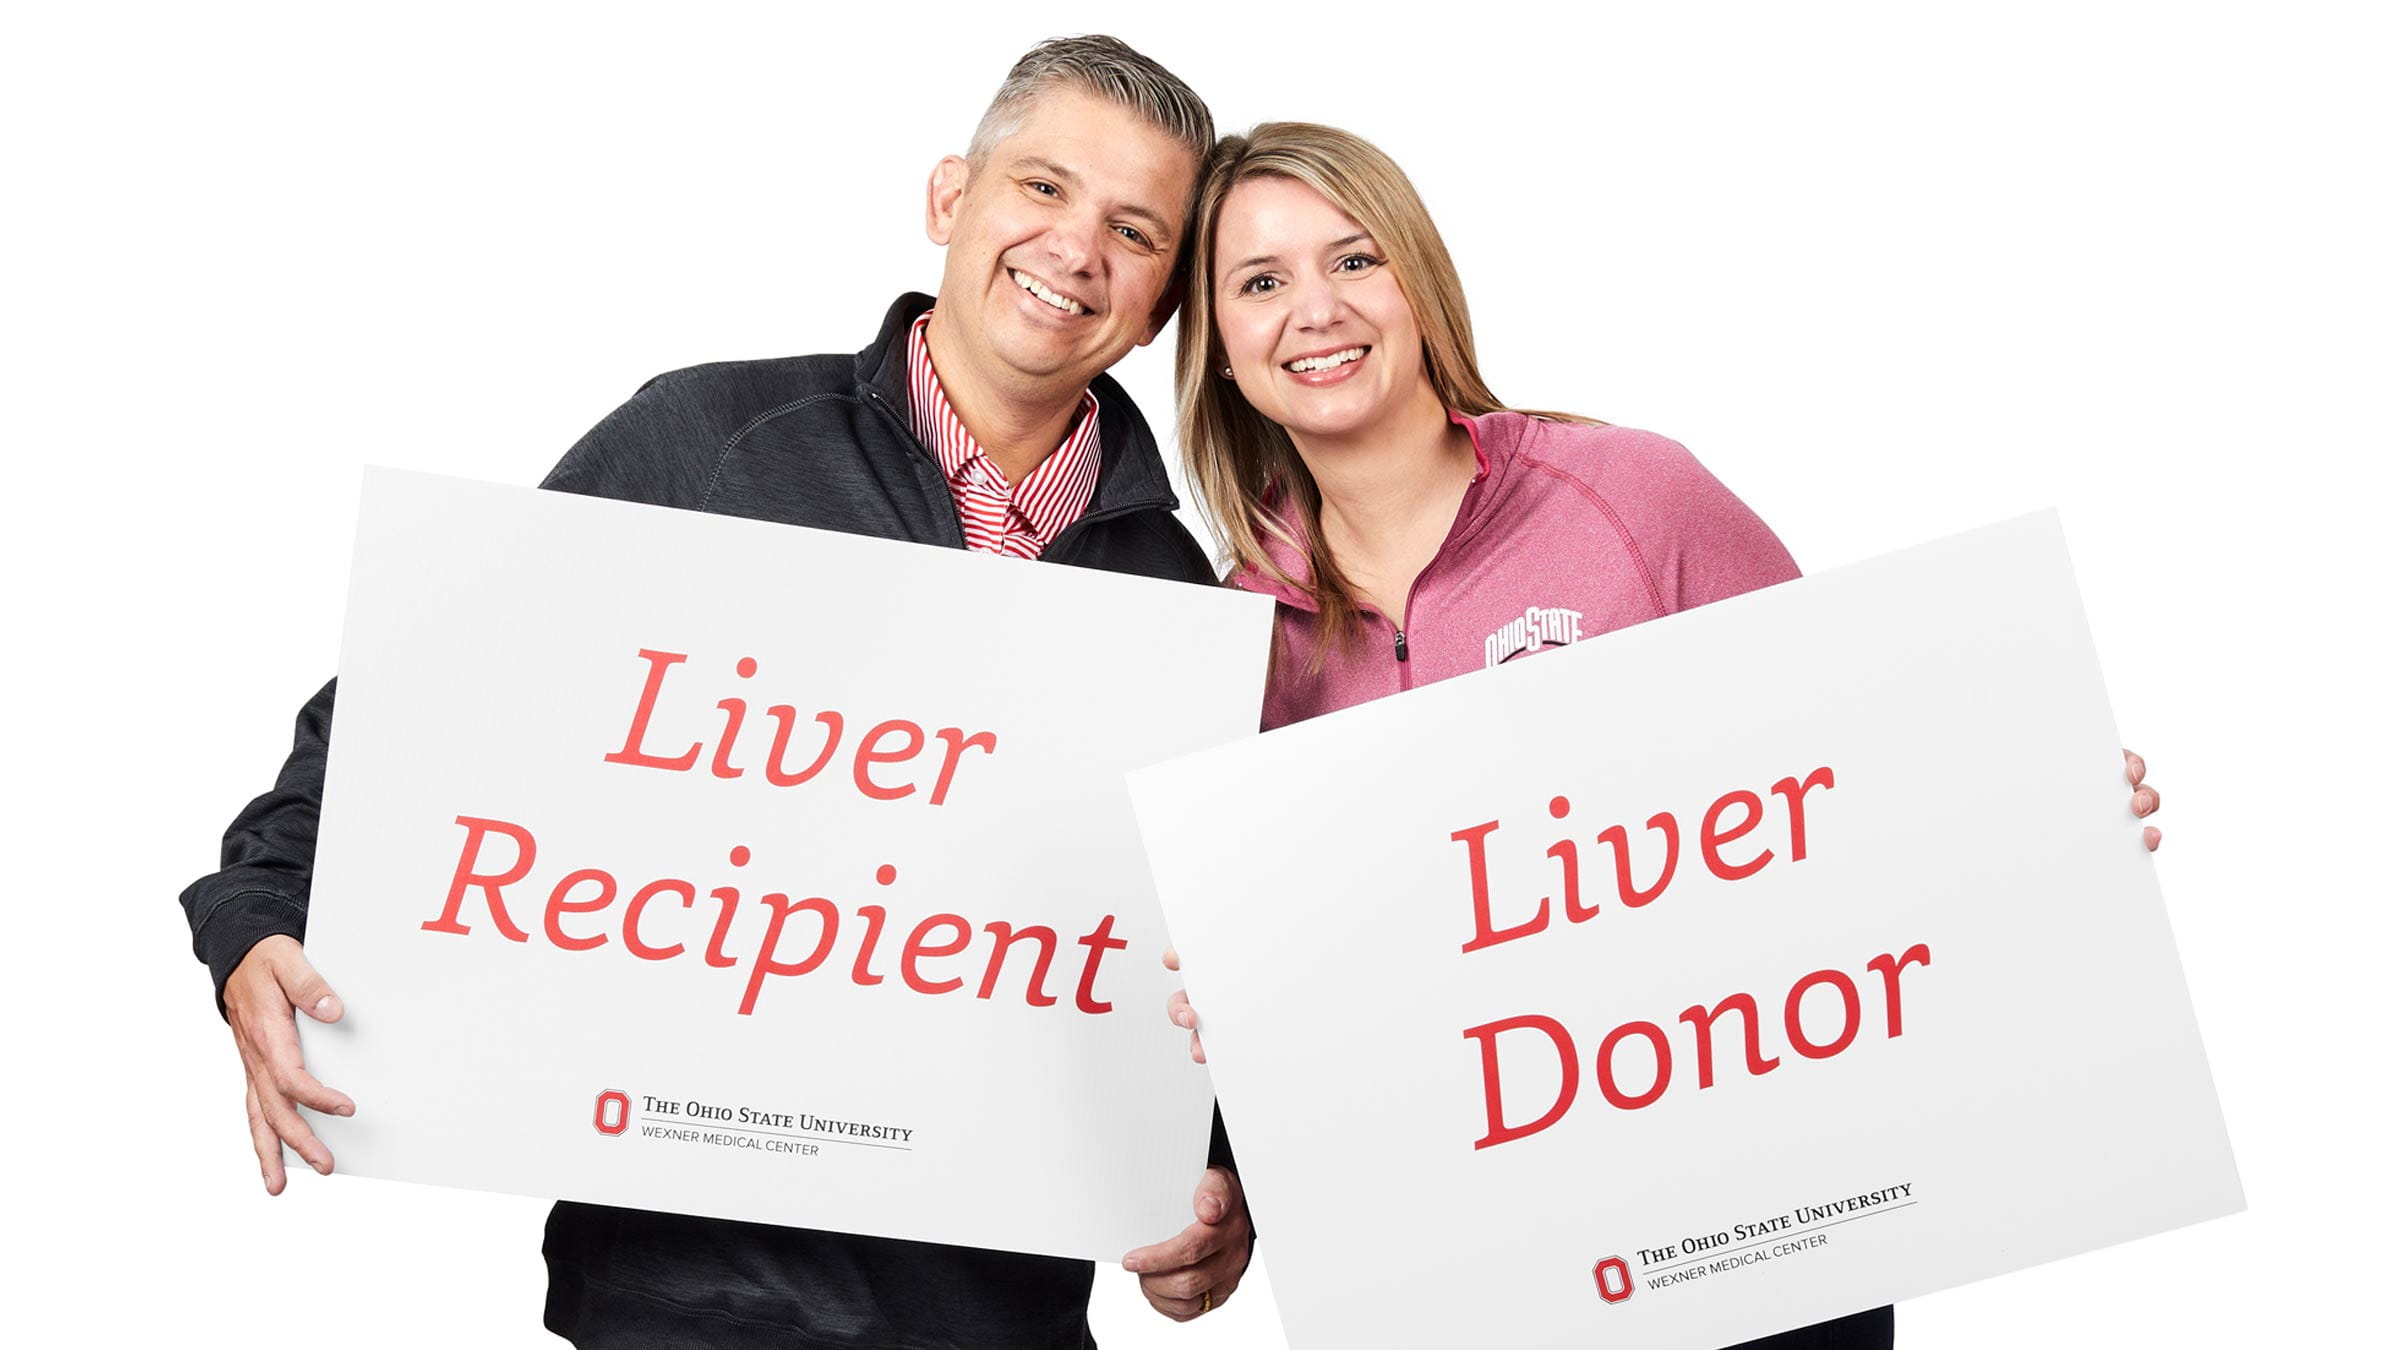 Living liver donor and recipient standing together